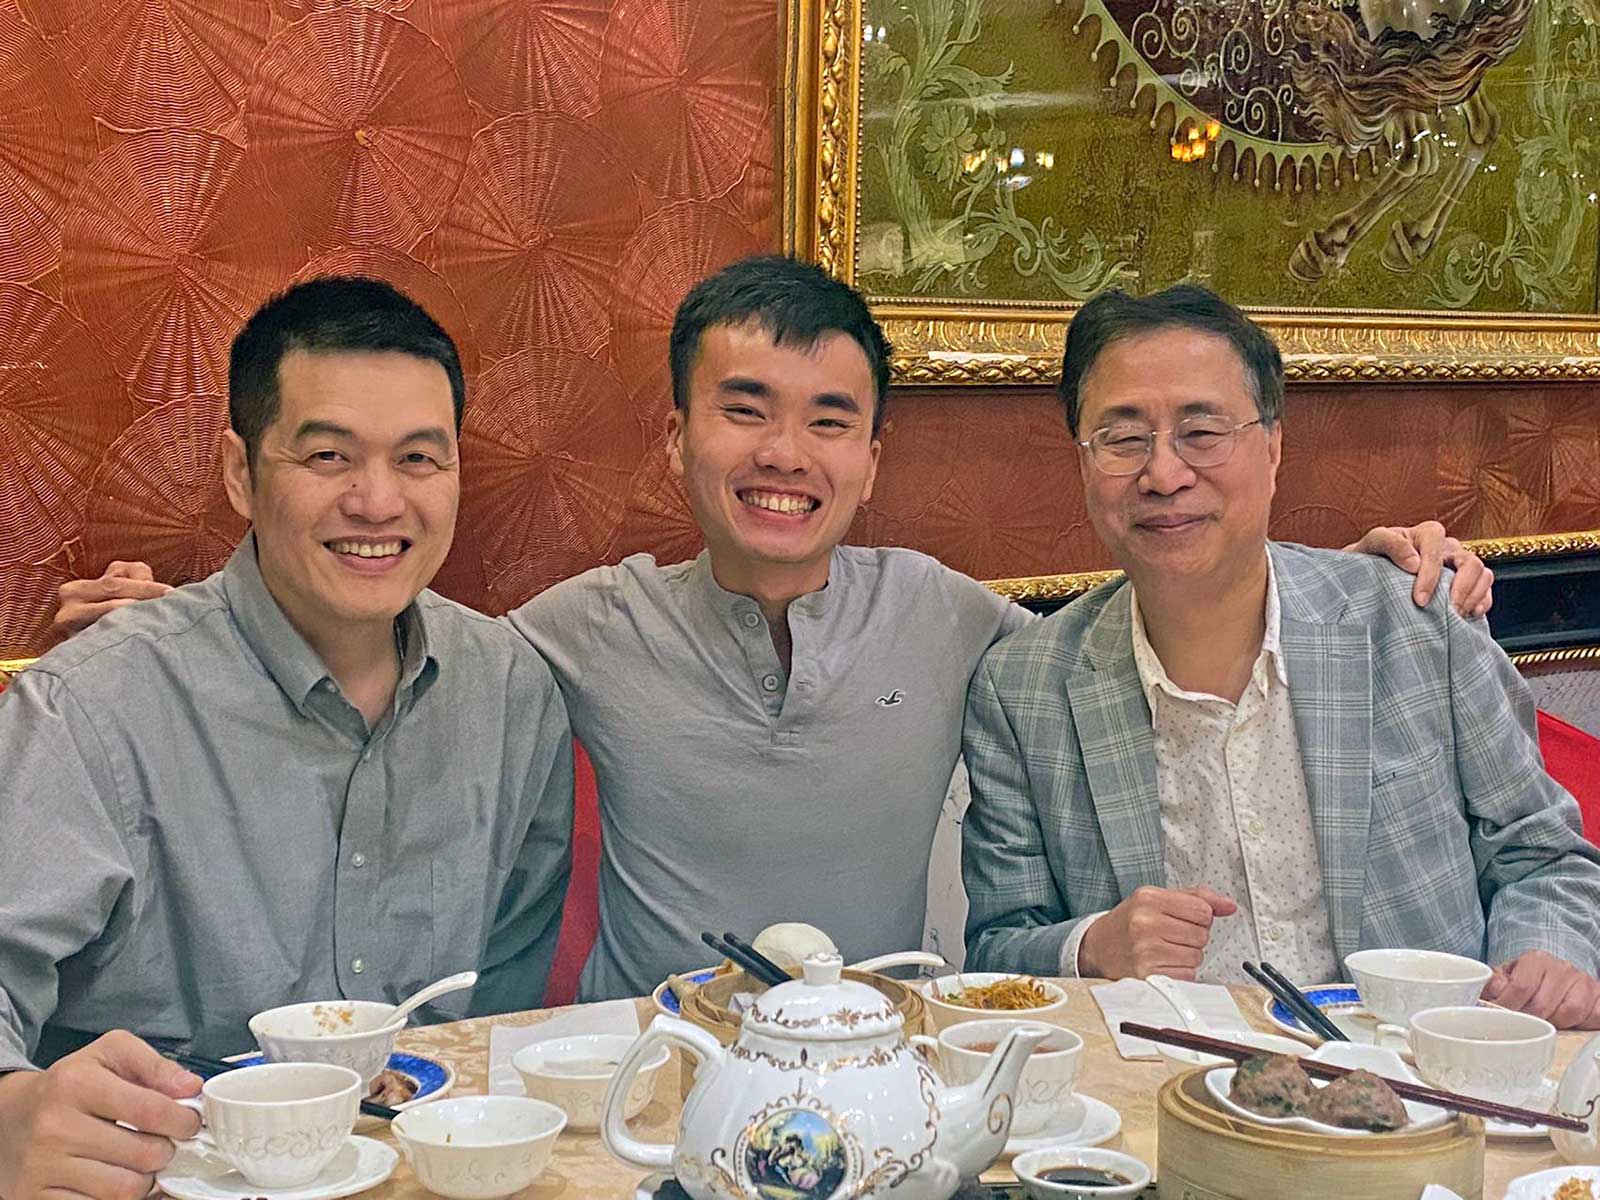 Photo of Elgene (middle) with his manager, Simon (left), and his boss, Stephen Chan, Chief Executive Officer of VISFUTURE (right).